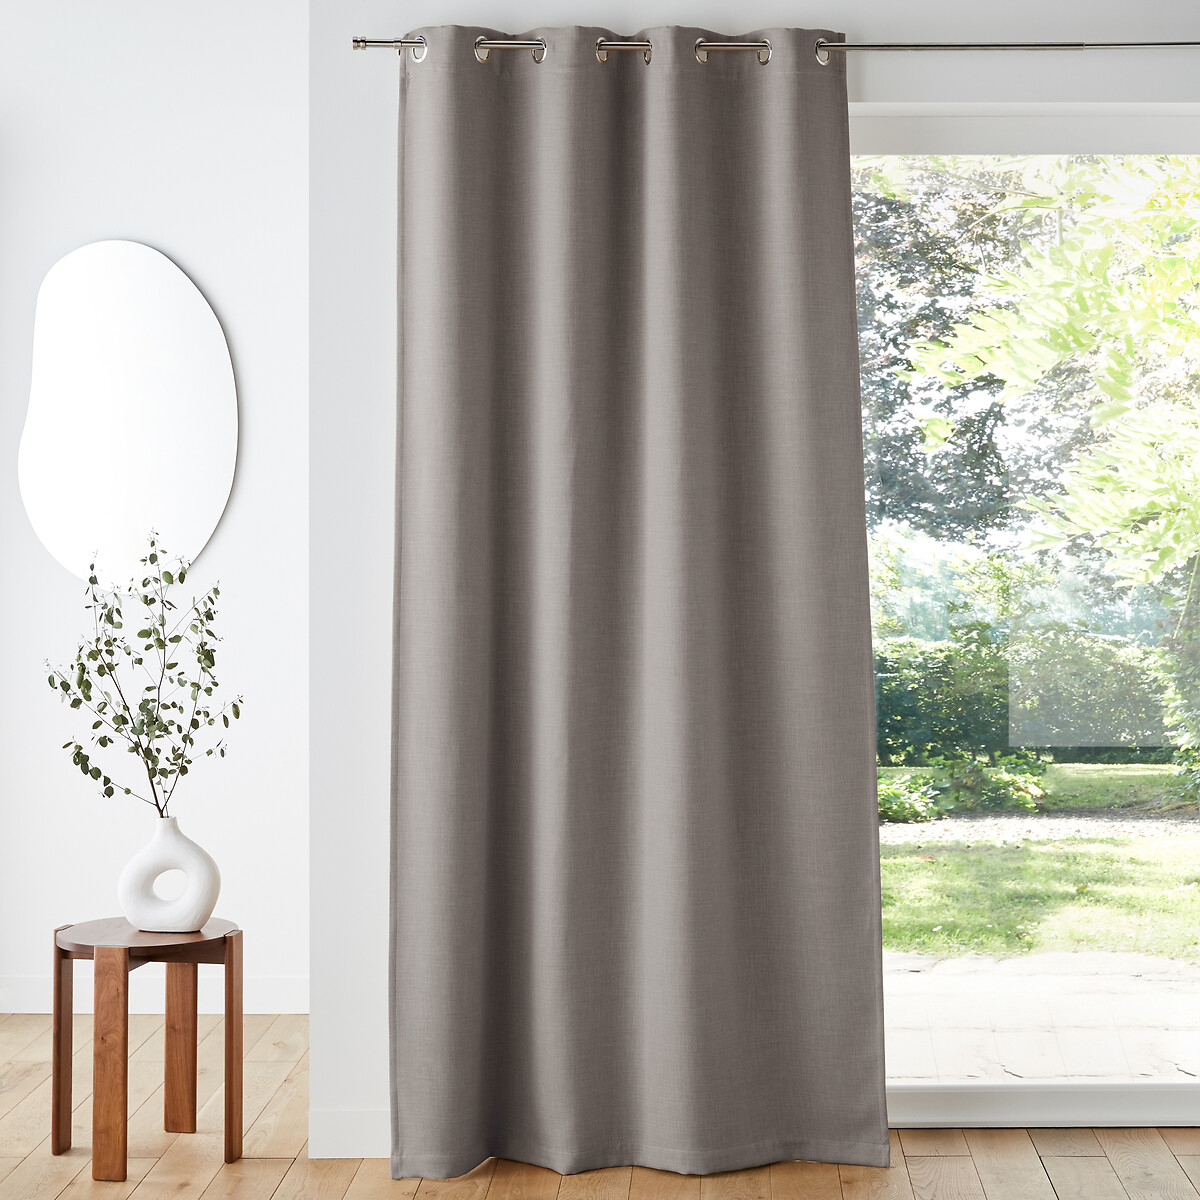 Excurie Blackout Curtain with Eyelets